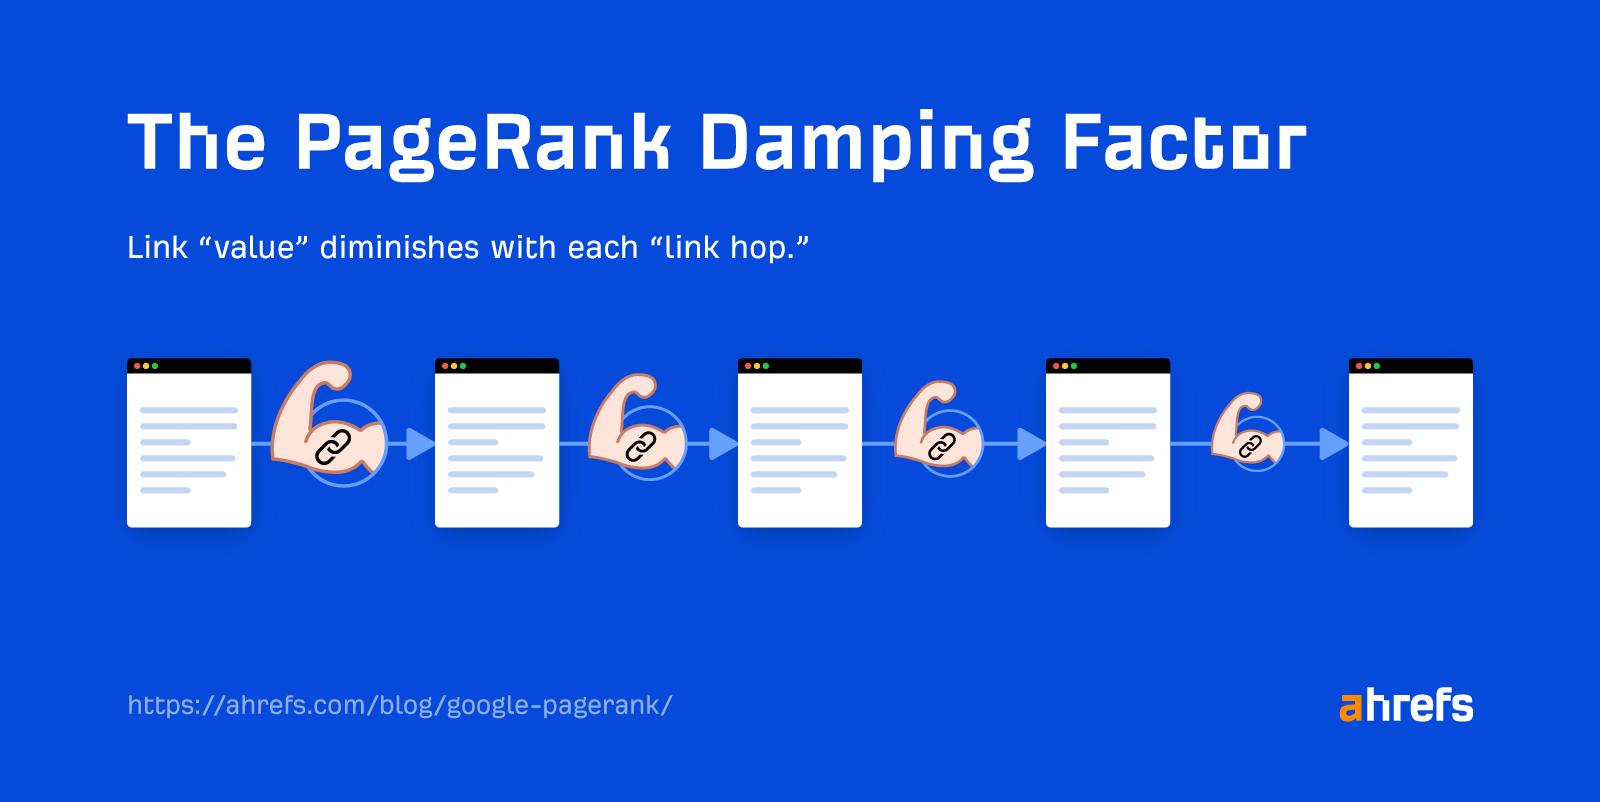 Example s،wing the PageRank Damping Factor
